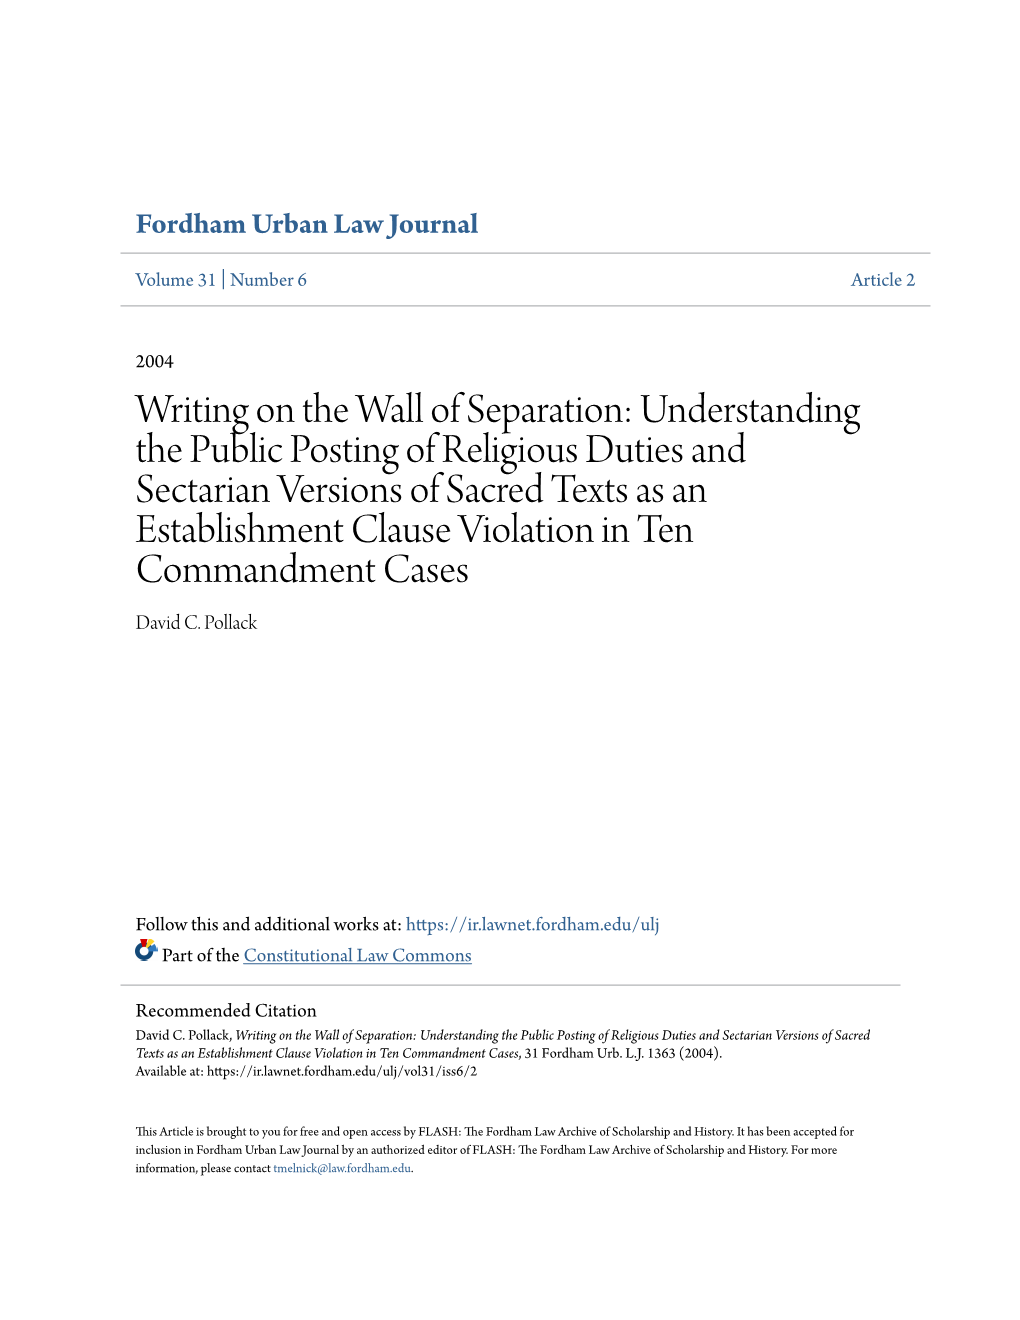 Writing on the Wall of Separation: Understanding the Public Posting of Religious Duties and Sectarian Versions of Sacred Texts A